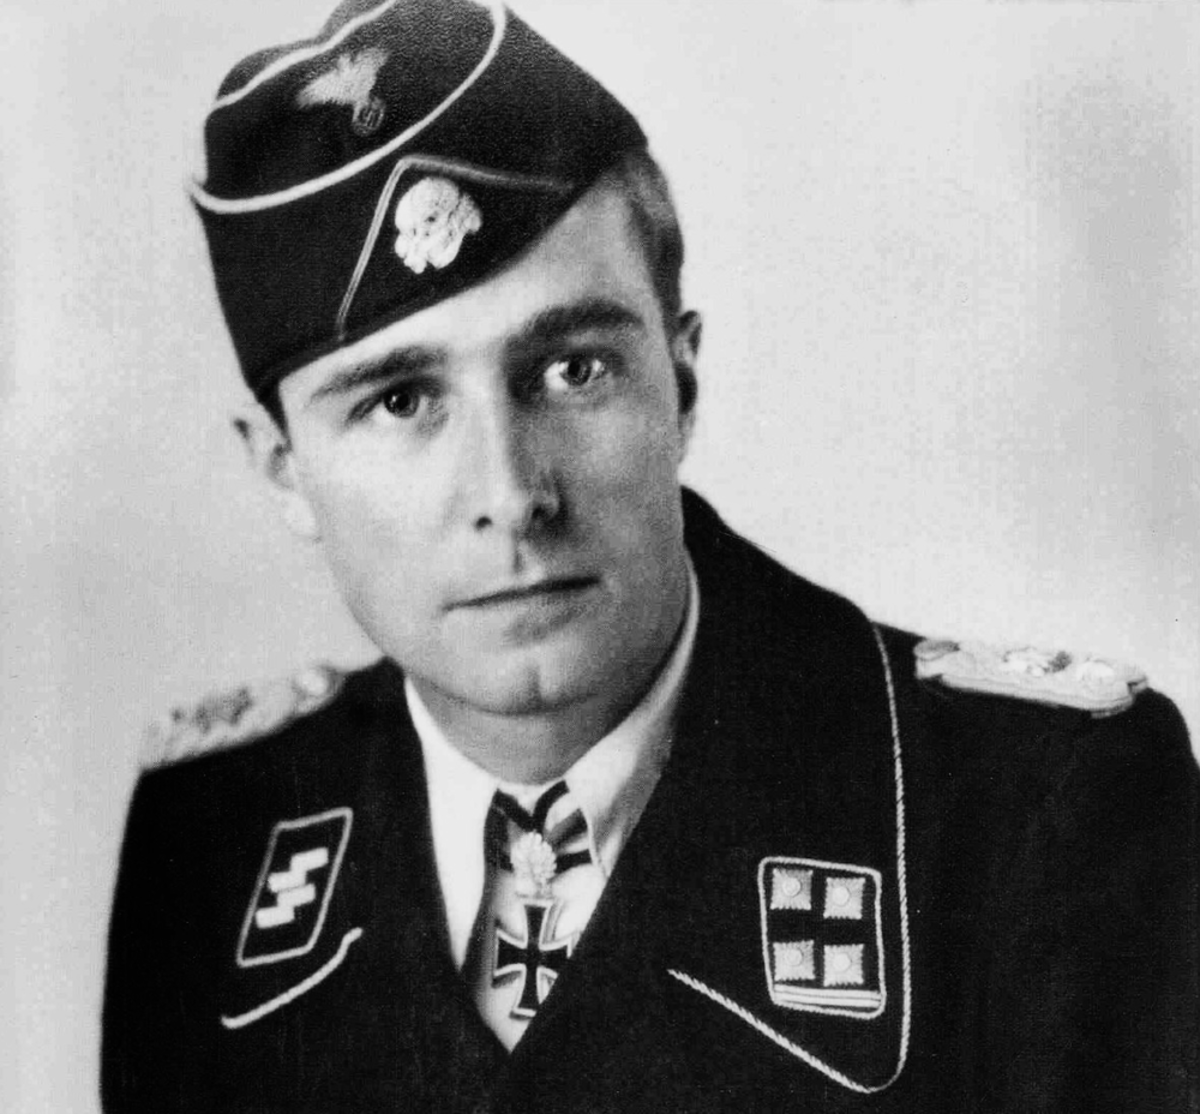 Noted for his fighting spirit and aggressive leadership in battle, tank commander Peiper's victories came at the cost of many German tanks and casualties among Waffen-SS.